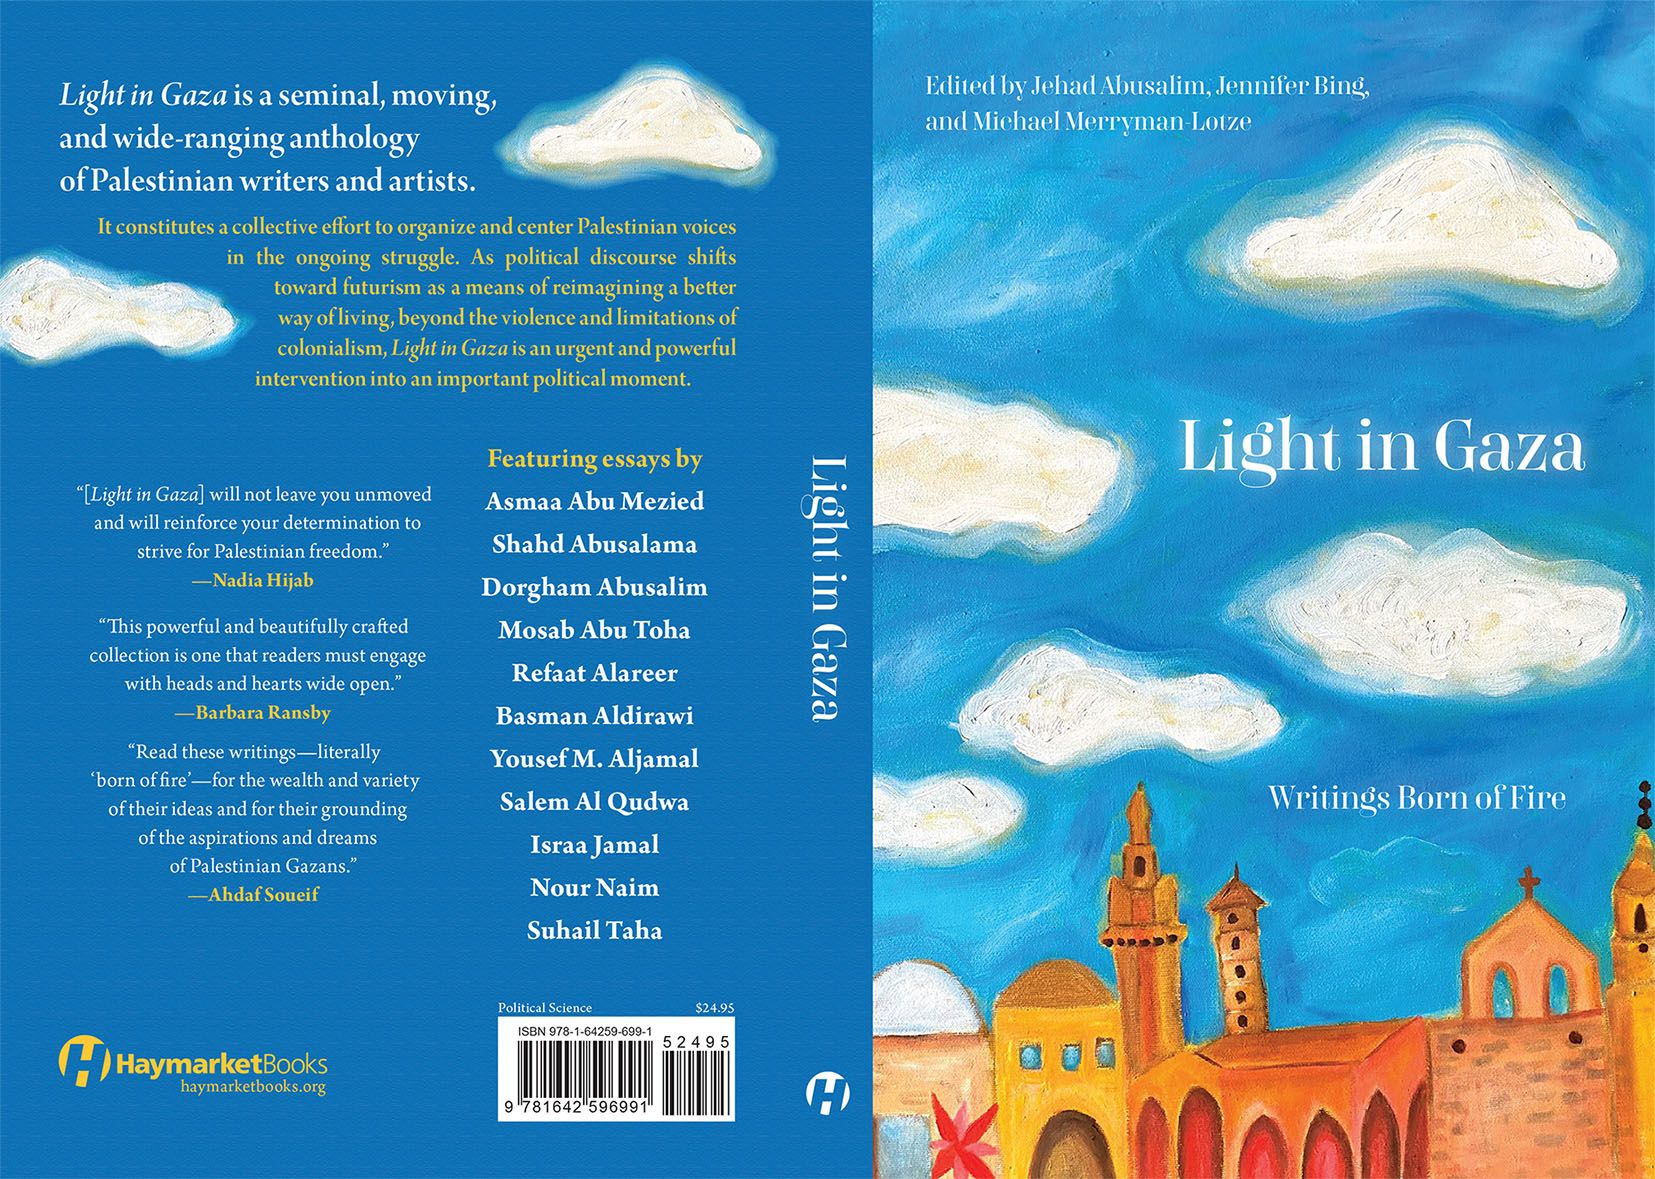 AFSC and Haymarket Publishes Light in Gaza: Writings Born of Fire